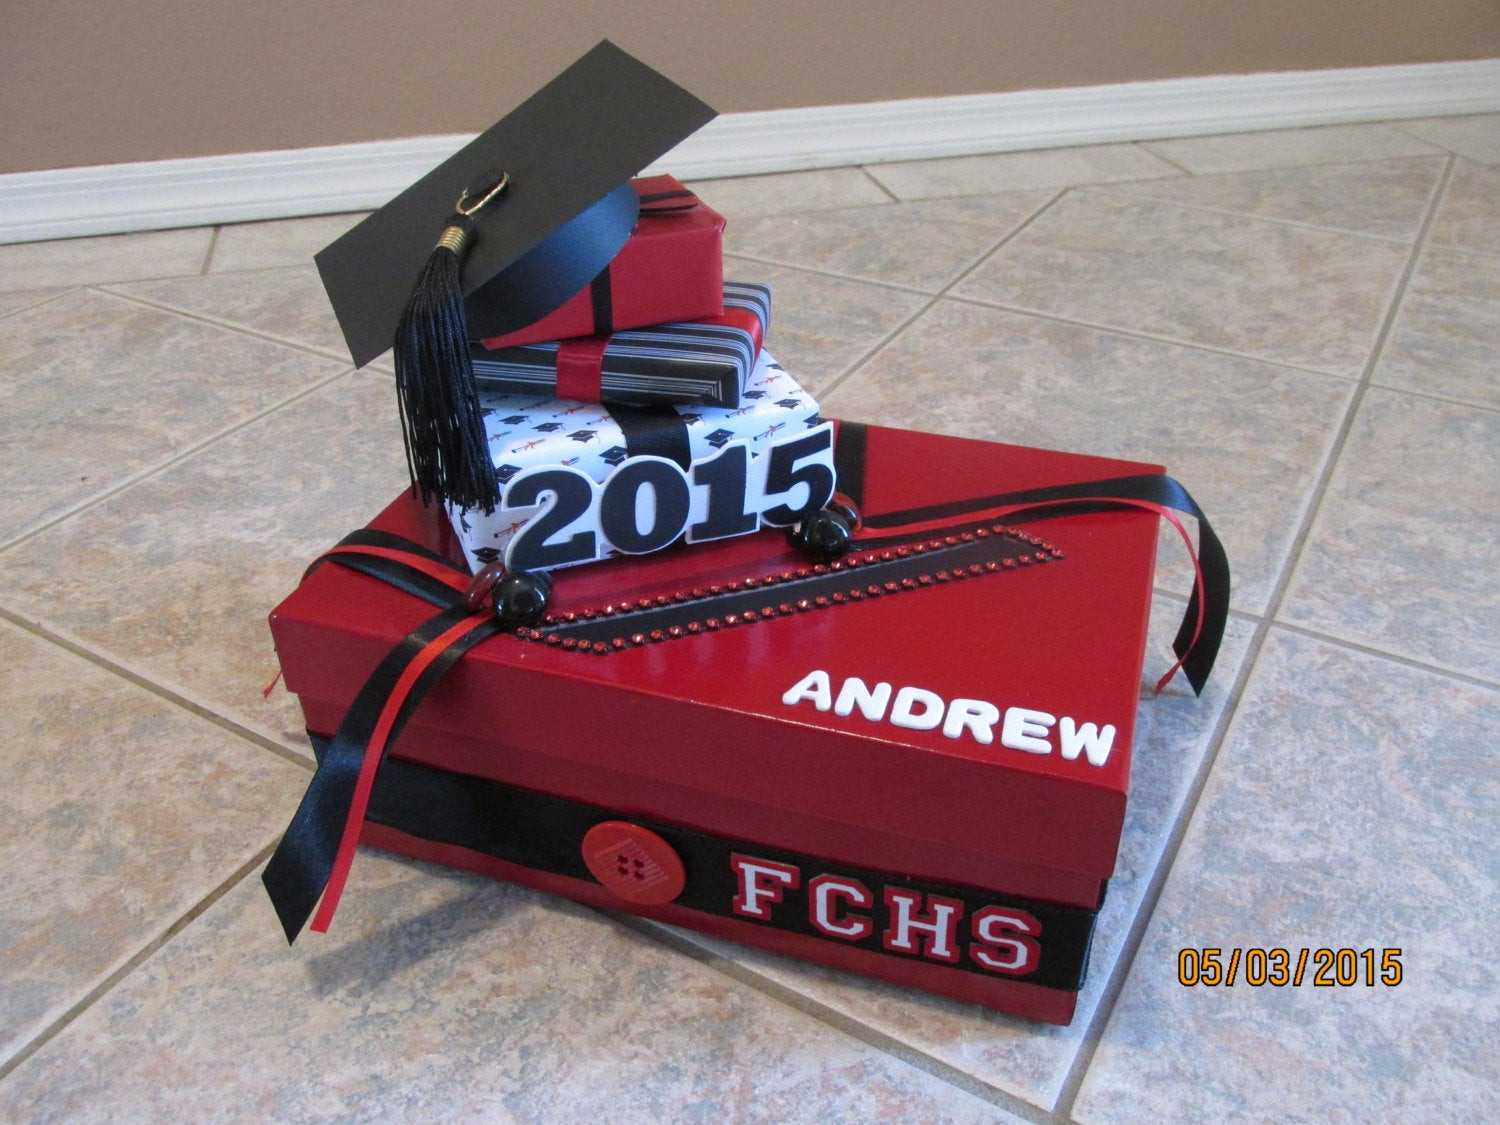 Card Box Ideas For Graduation Party
 Graduation Party Card Box with Year Grad s by